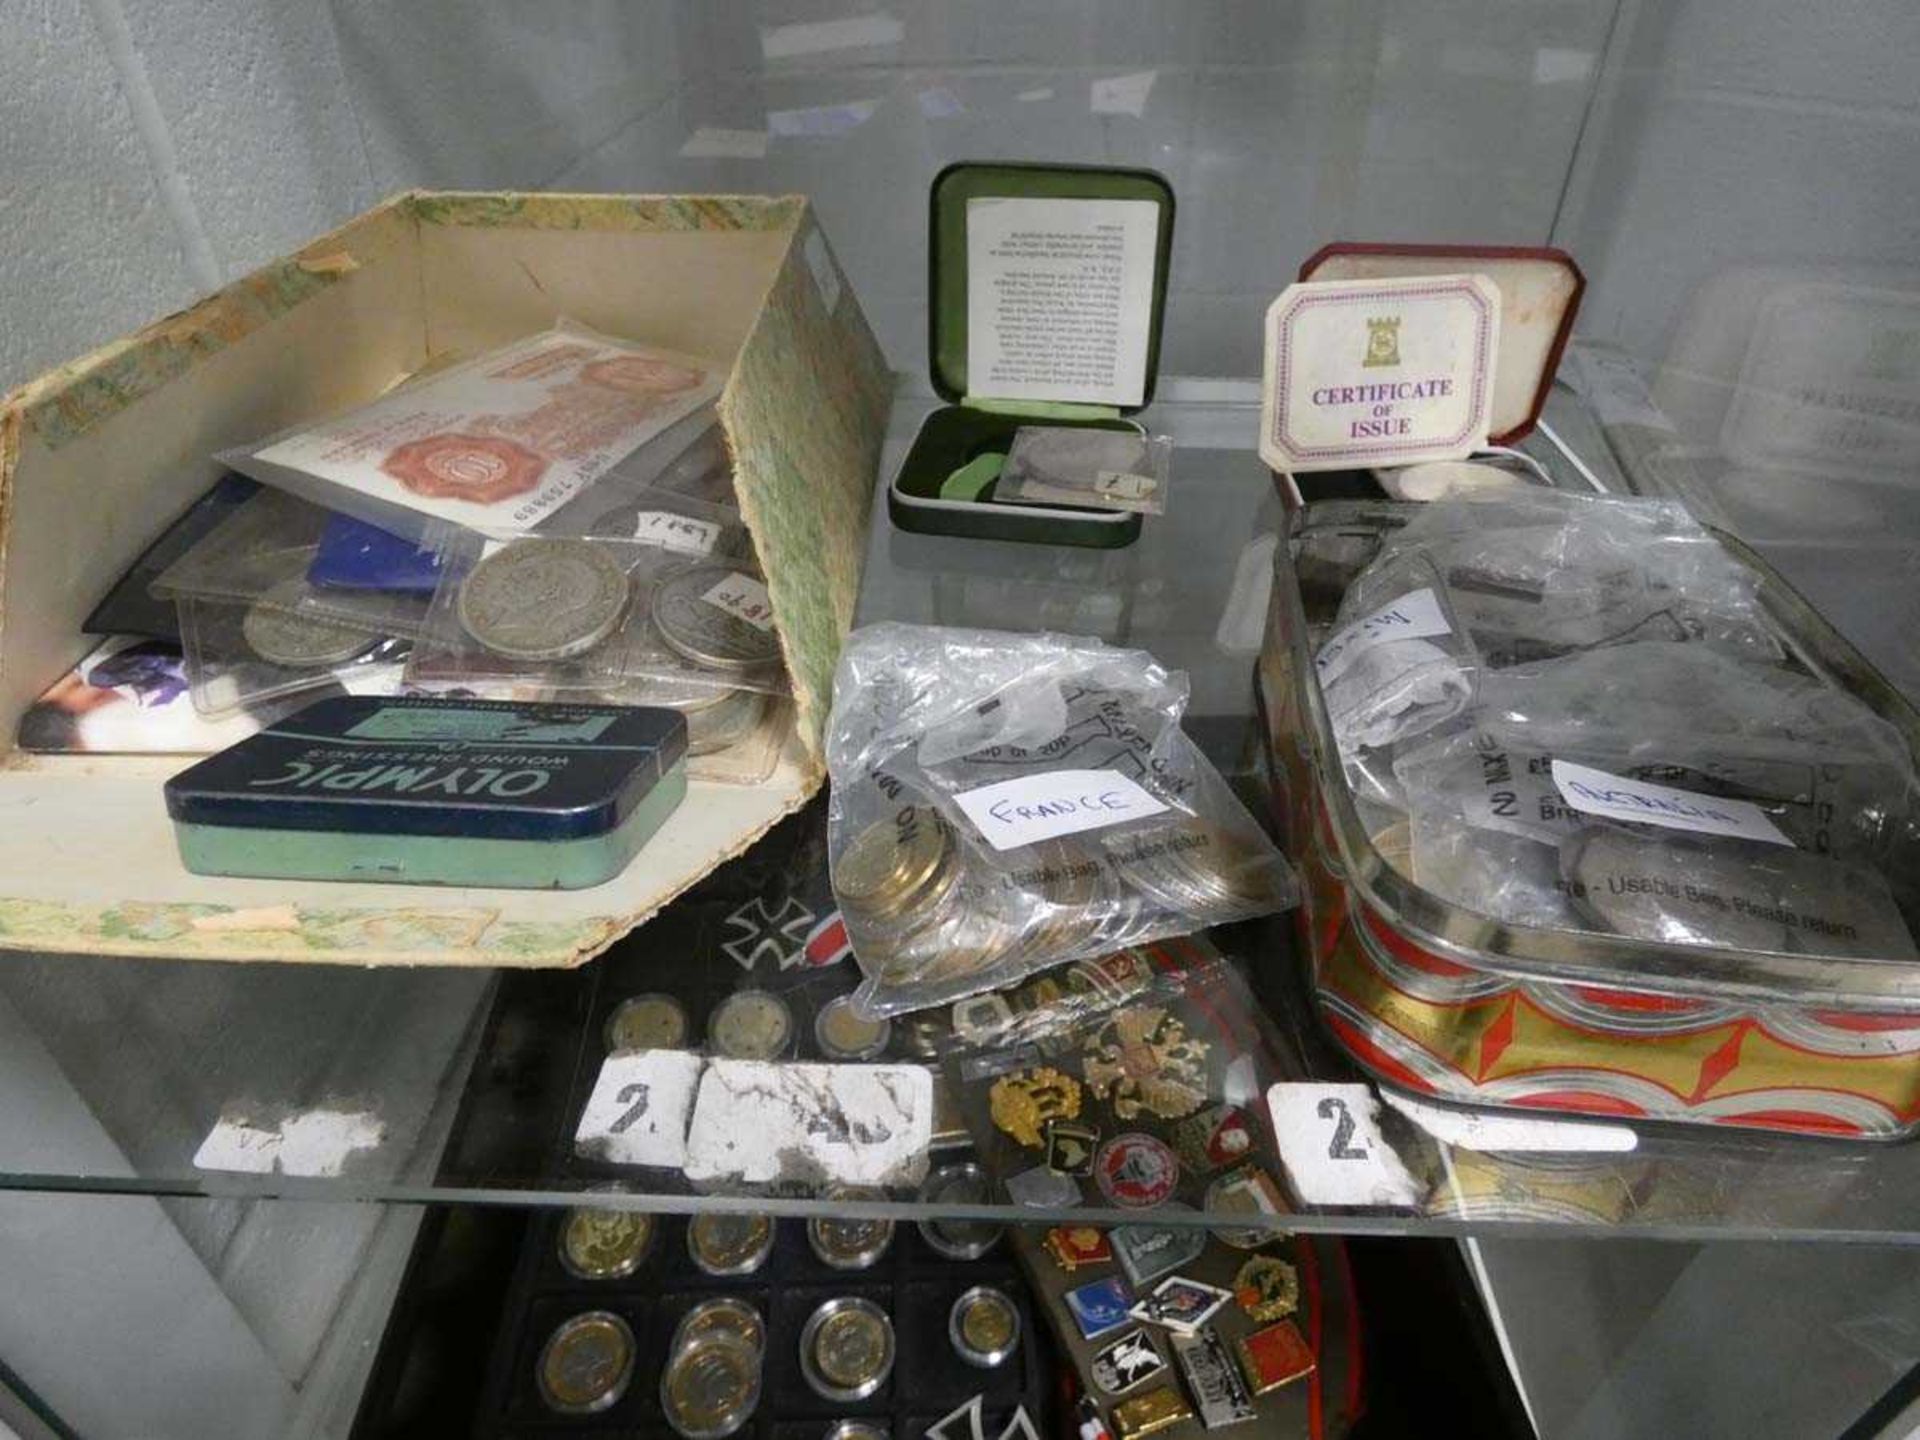 Various British GB coinage including a 1935 crown and other world coins including French and